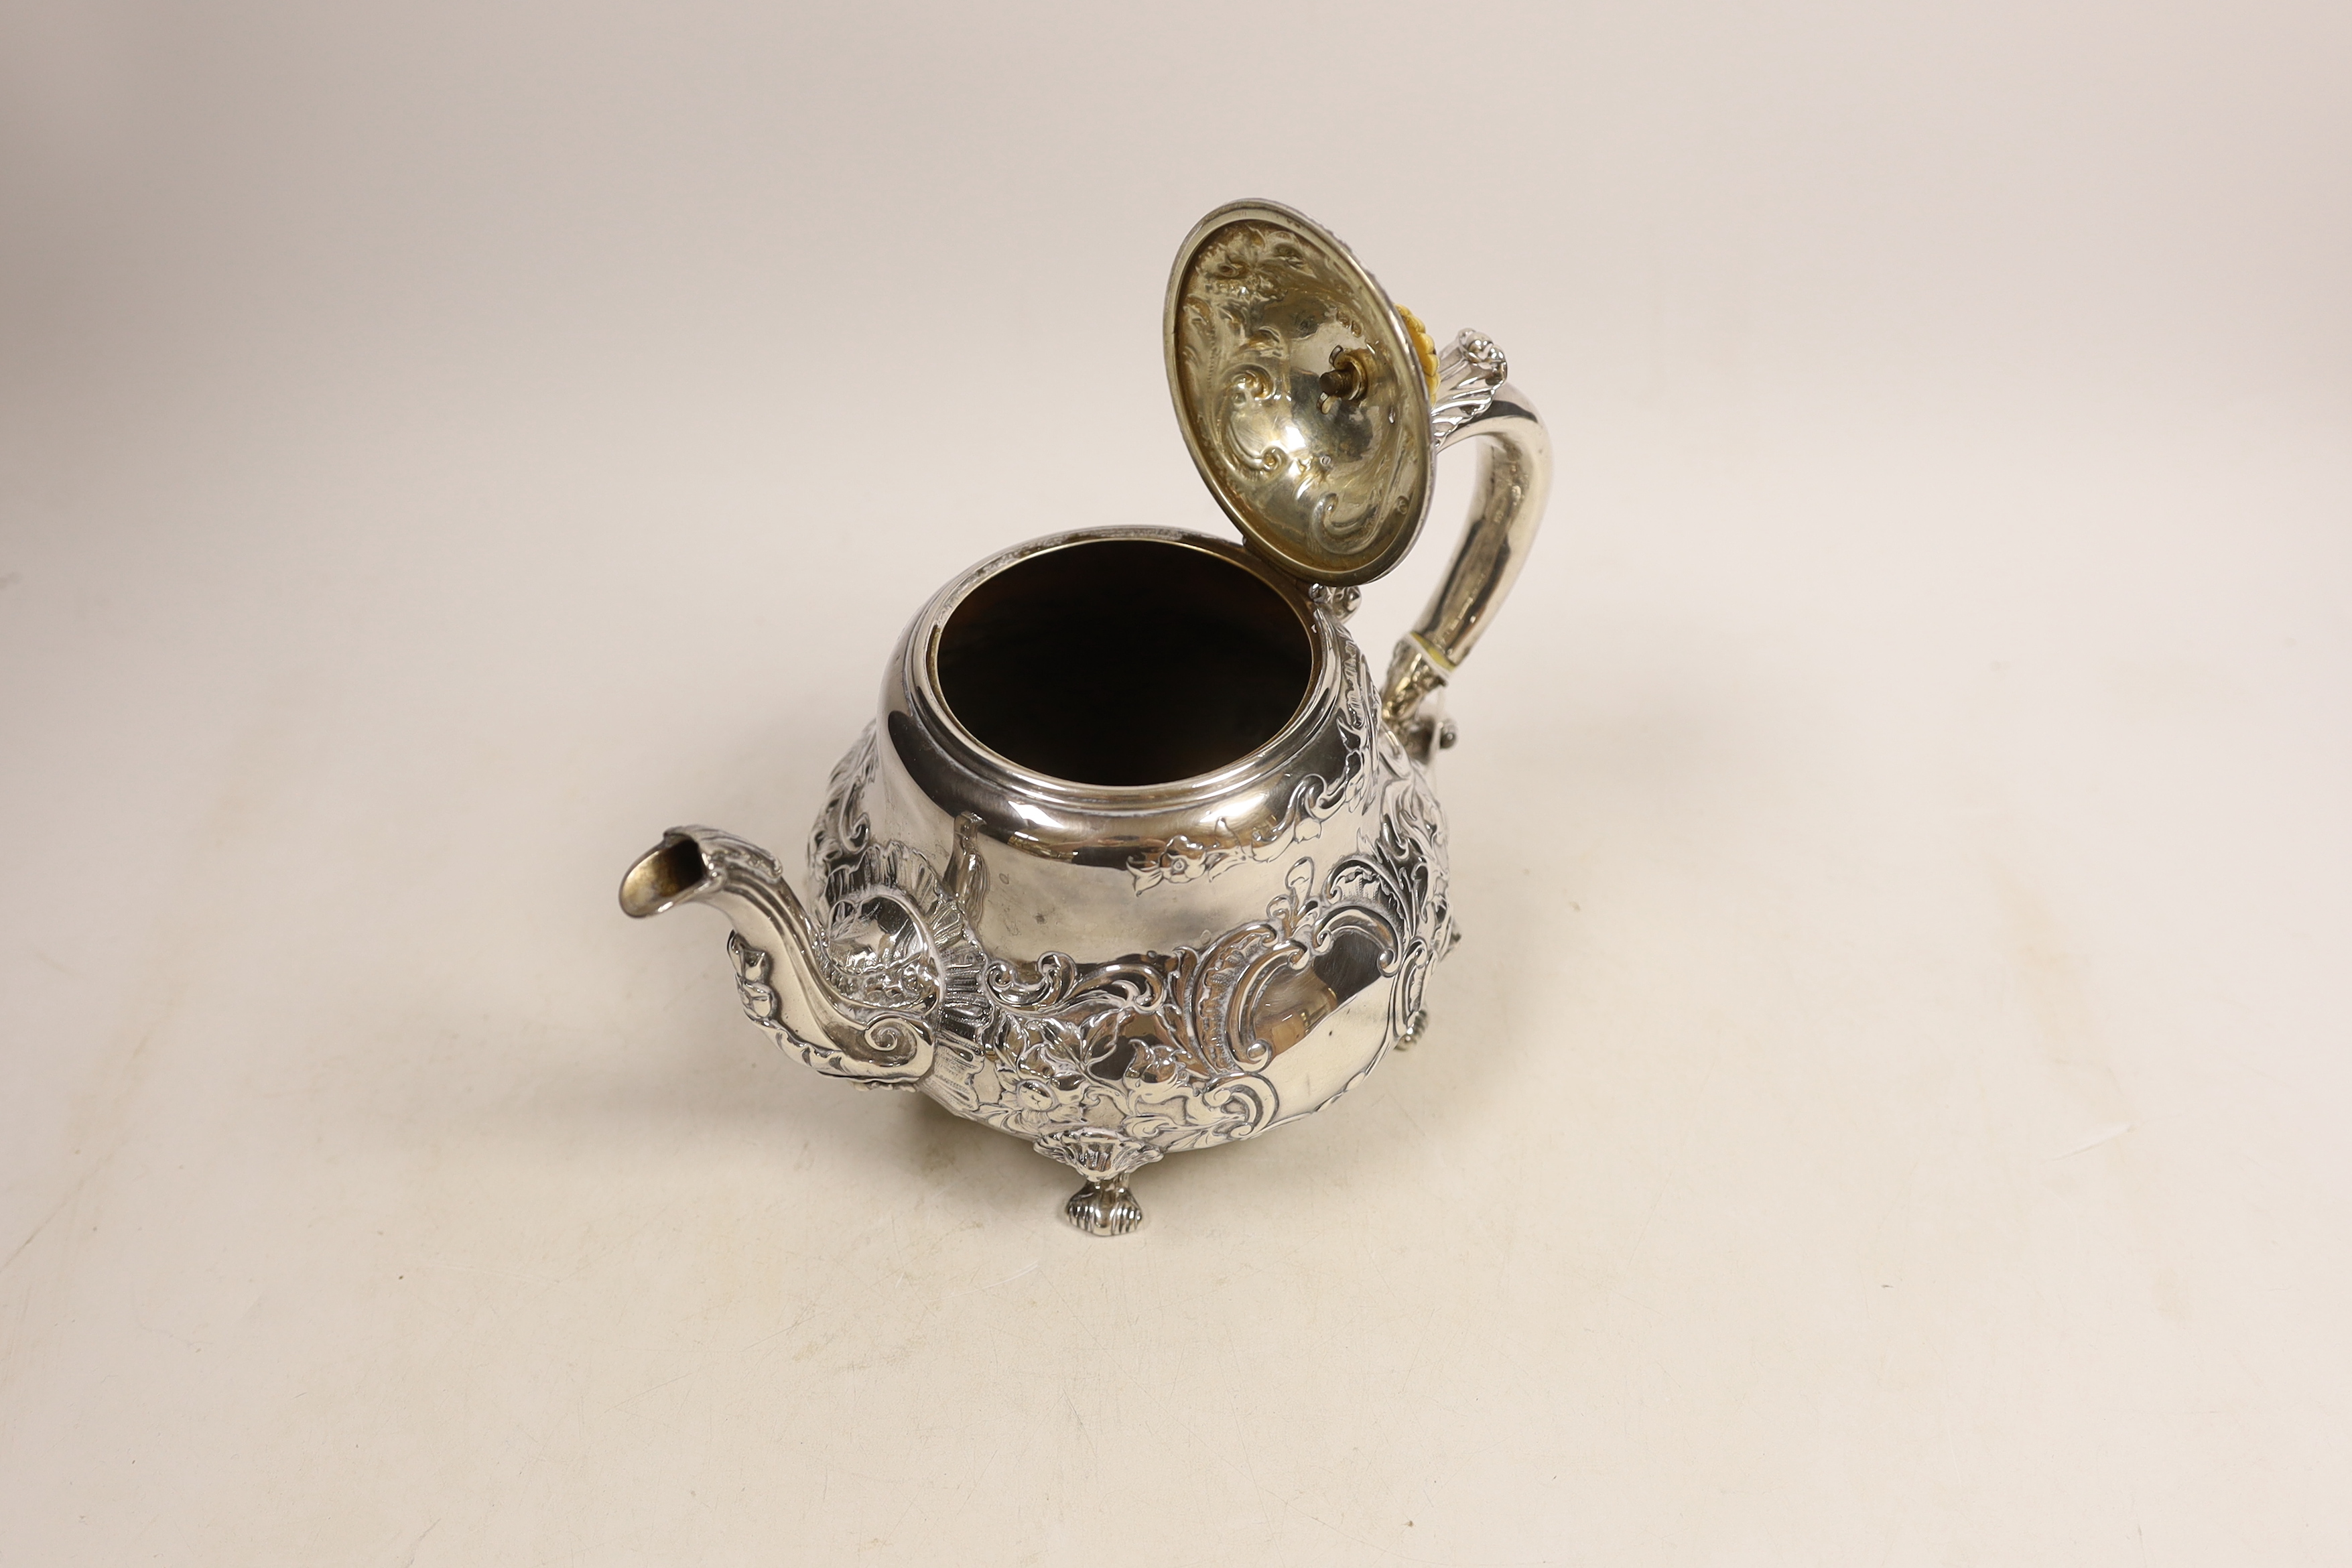 An early Victorian embossed silver teapot, Robert Hennell III, London, 1843, gross weight 22.2oz. - Image 2 of 3